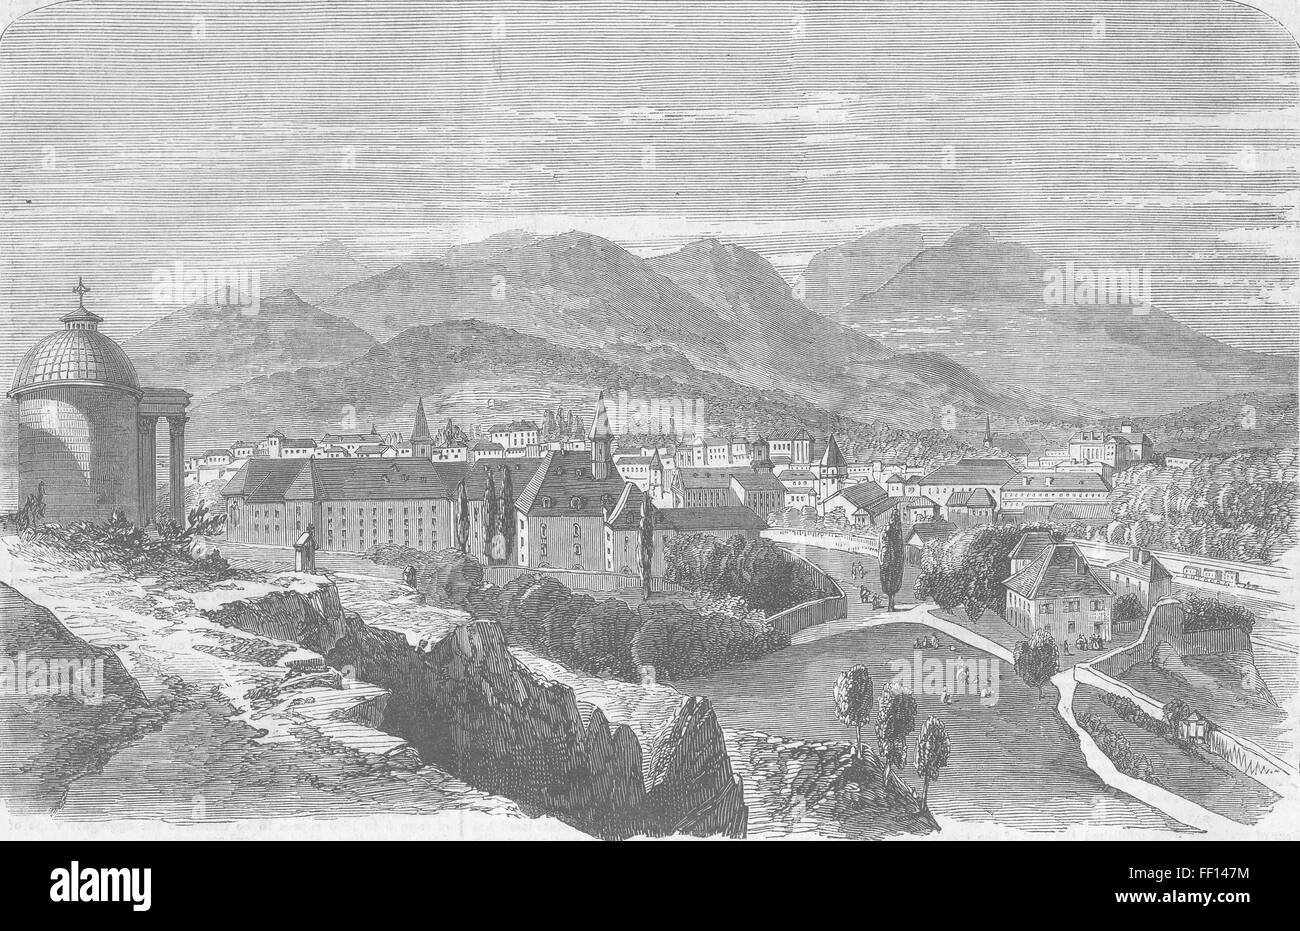 FRANCE Chambery, Savoie, from Mount Calvary 1860. Illustrated London News Stock Photo